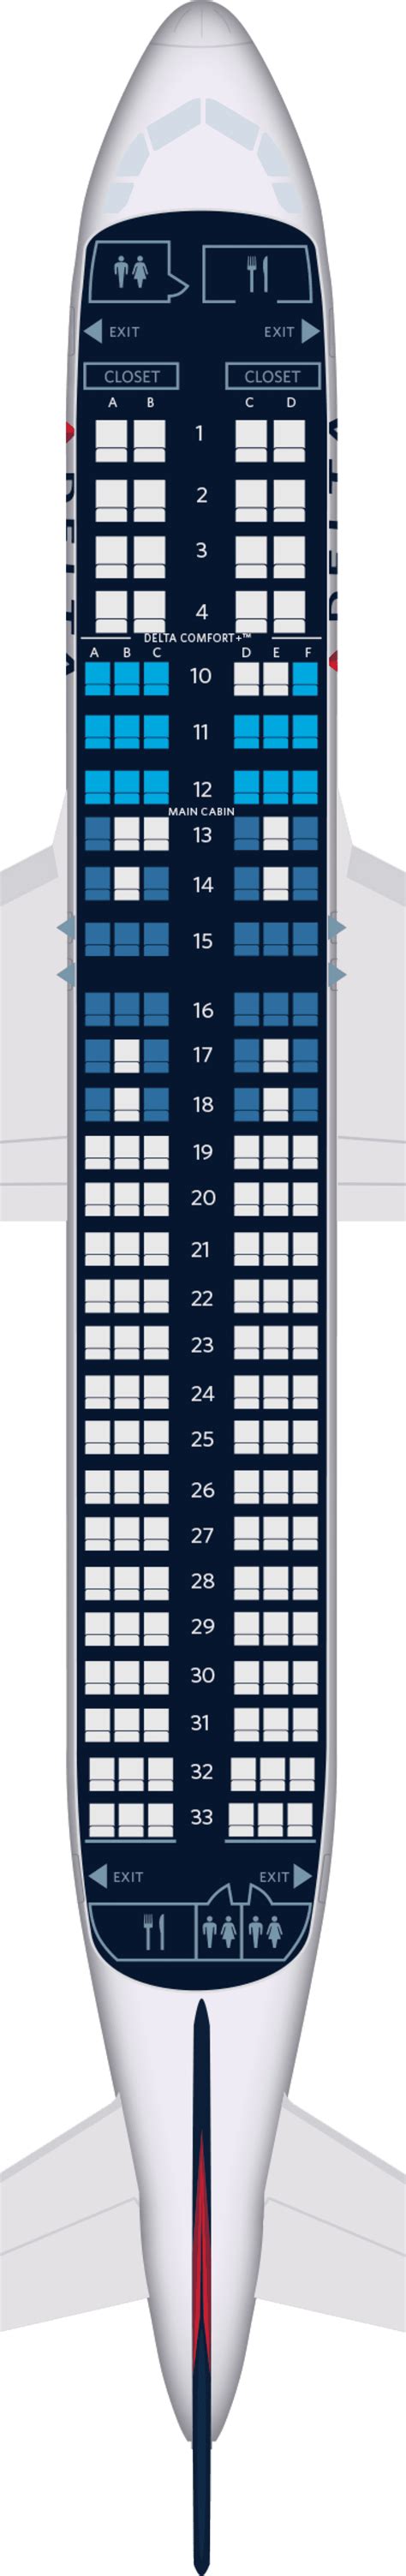 Airbus a320 aircraft seating. A variety of sizes and ranges. The A320neo Family is one aircraft in three sizes (A319, A320 and A321), representing the most successful and versatile jetliner family ever. Seating from 120 to 244 passengers and with ranges covering short and long range routes of up to 4,700nm. 